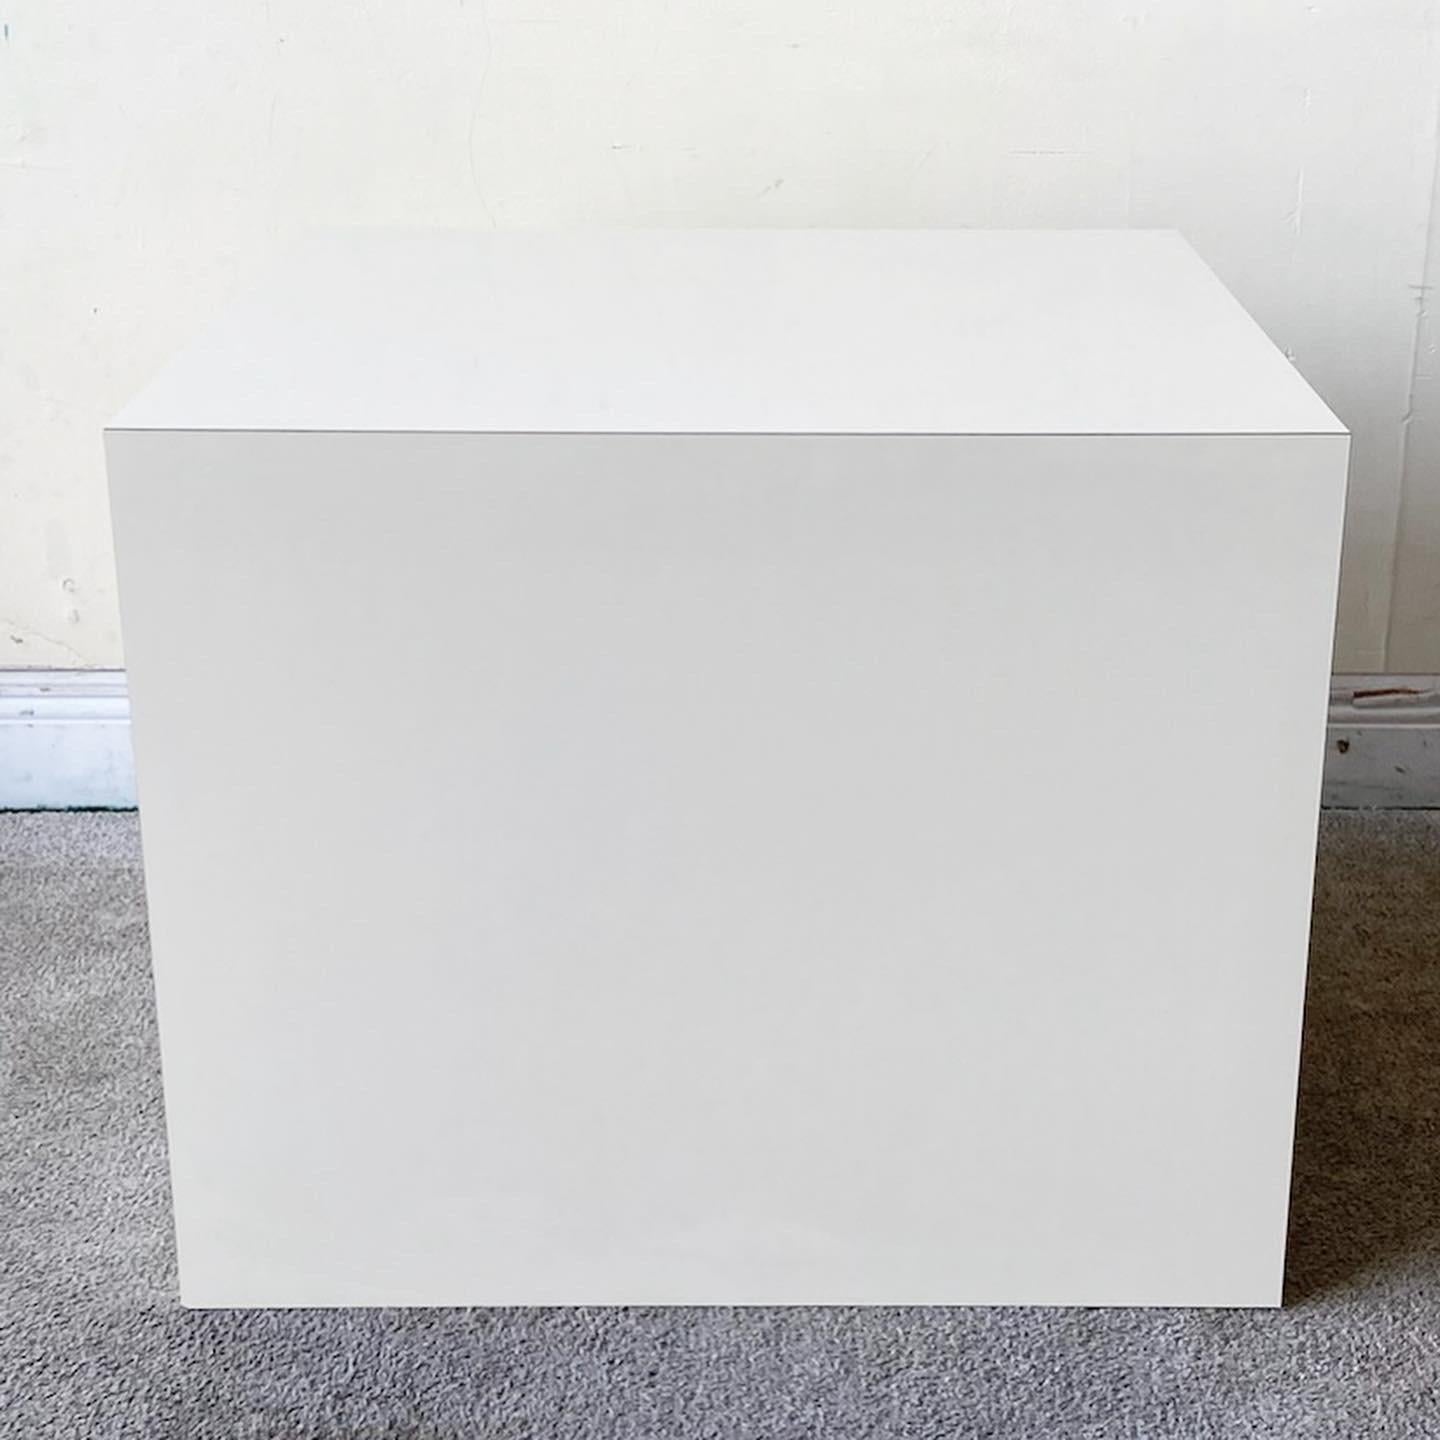 Exceptional postmodern side table. Features a cream lacquer laminate.
  